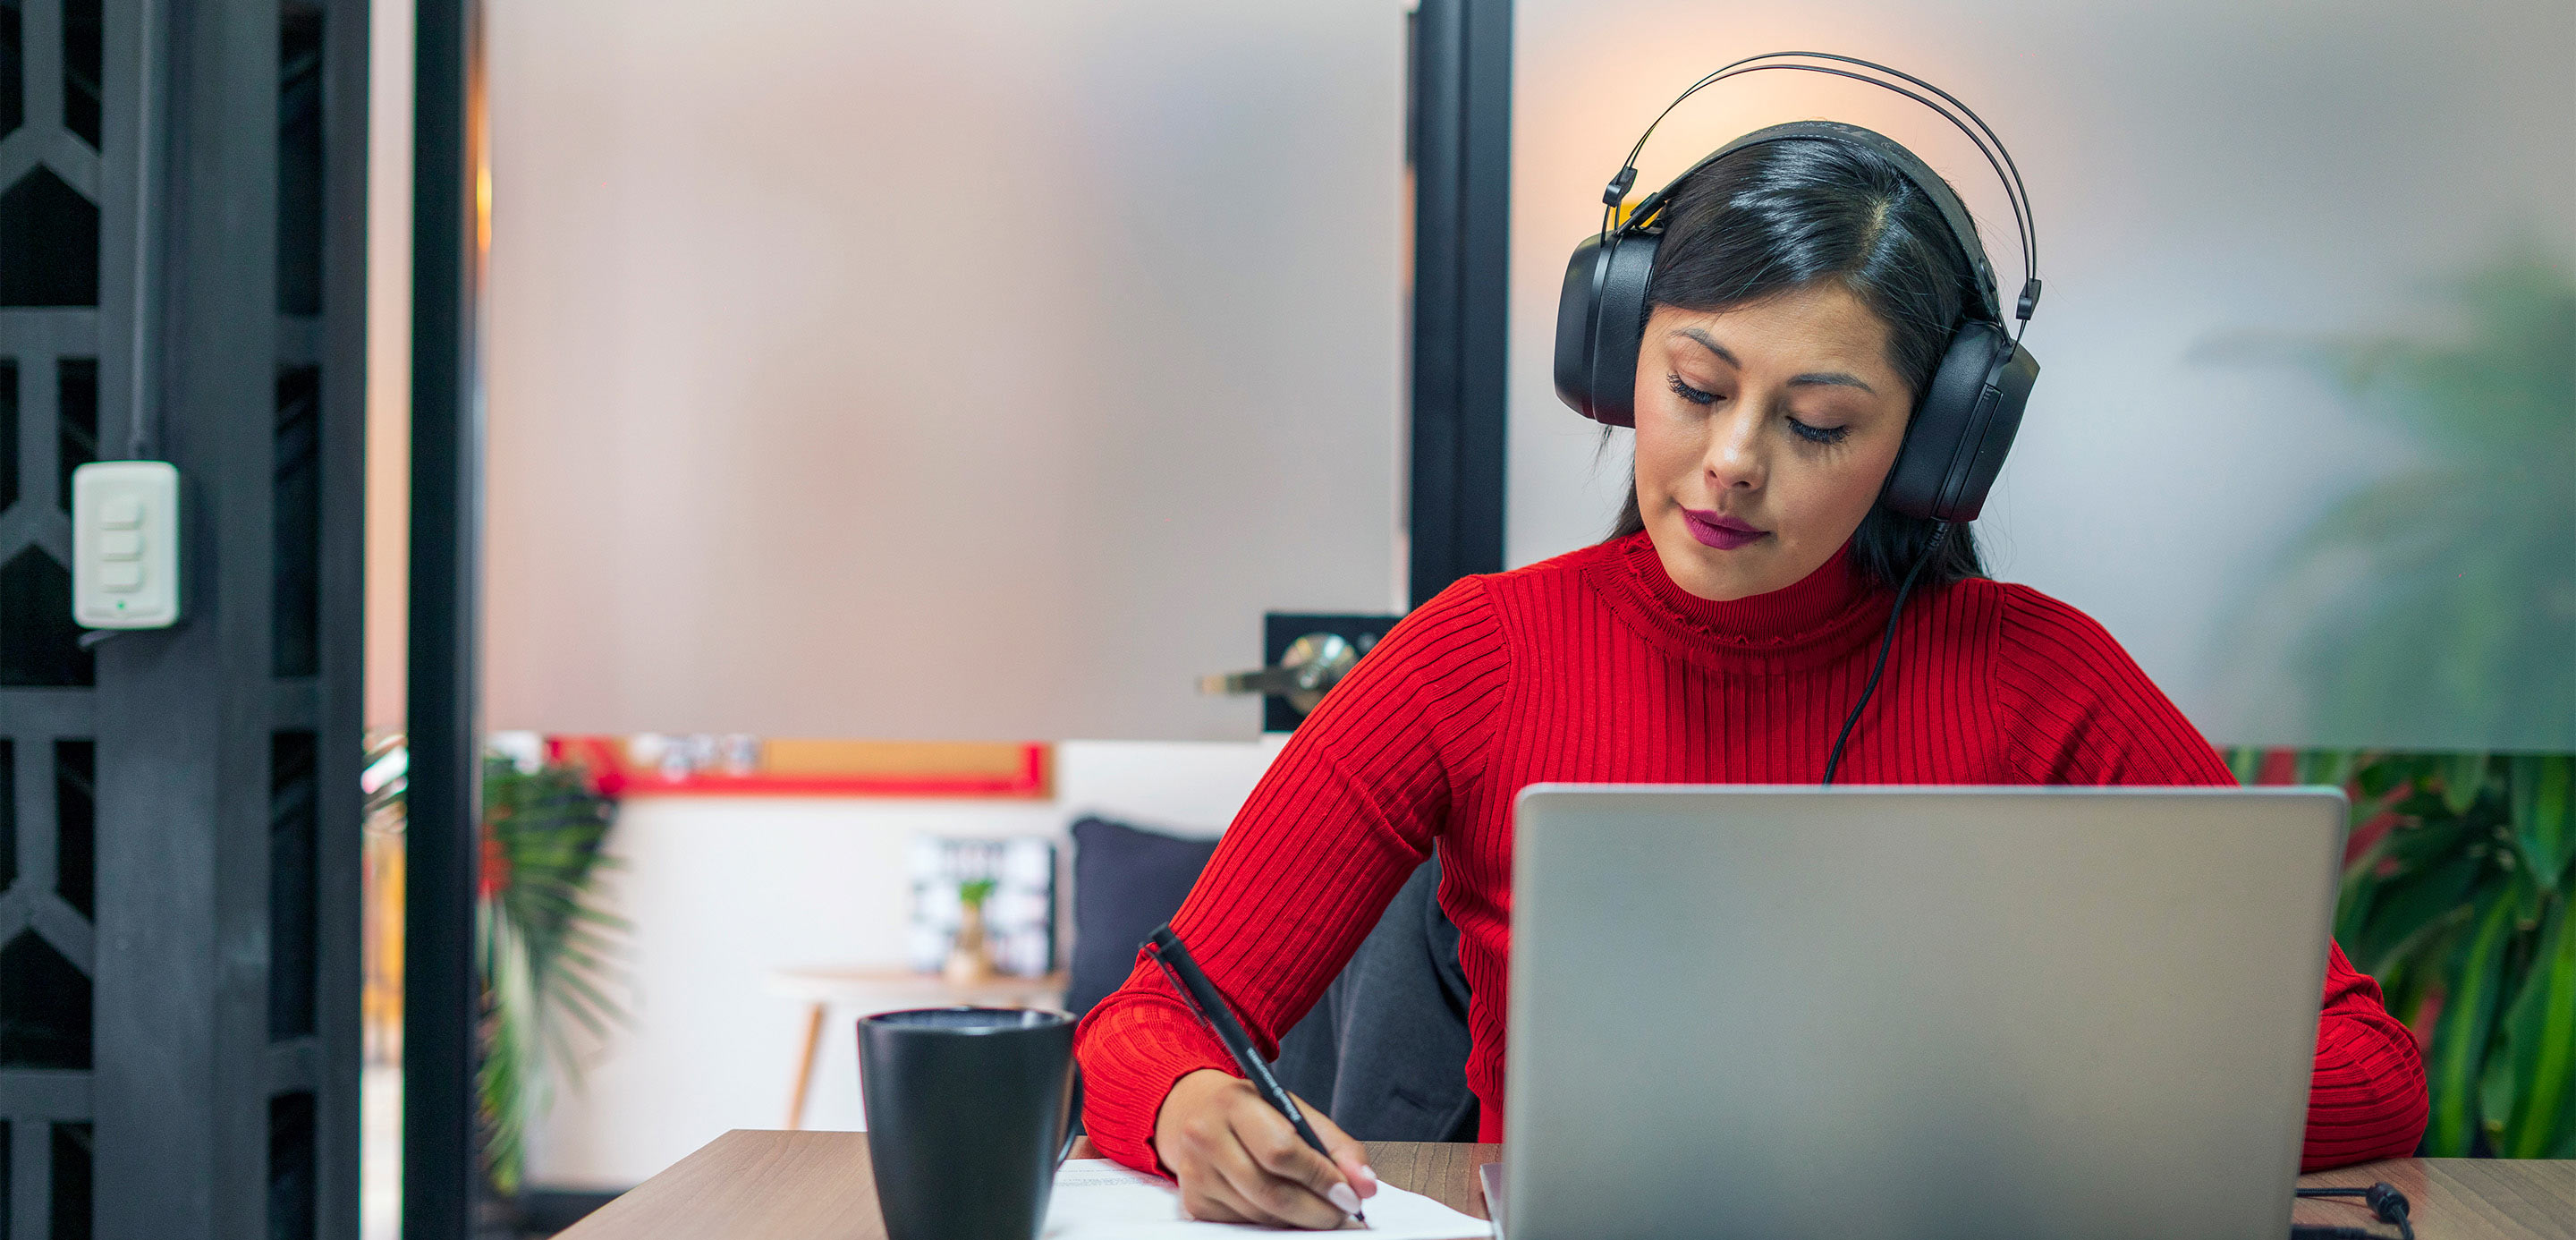 Lady with headphones working at laptop